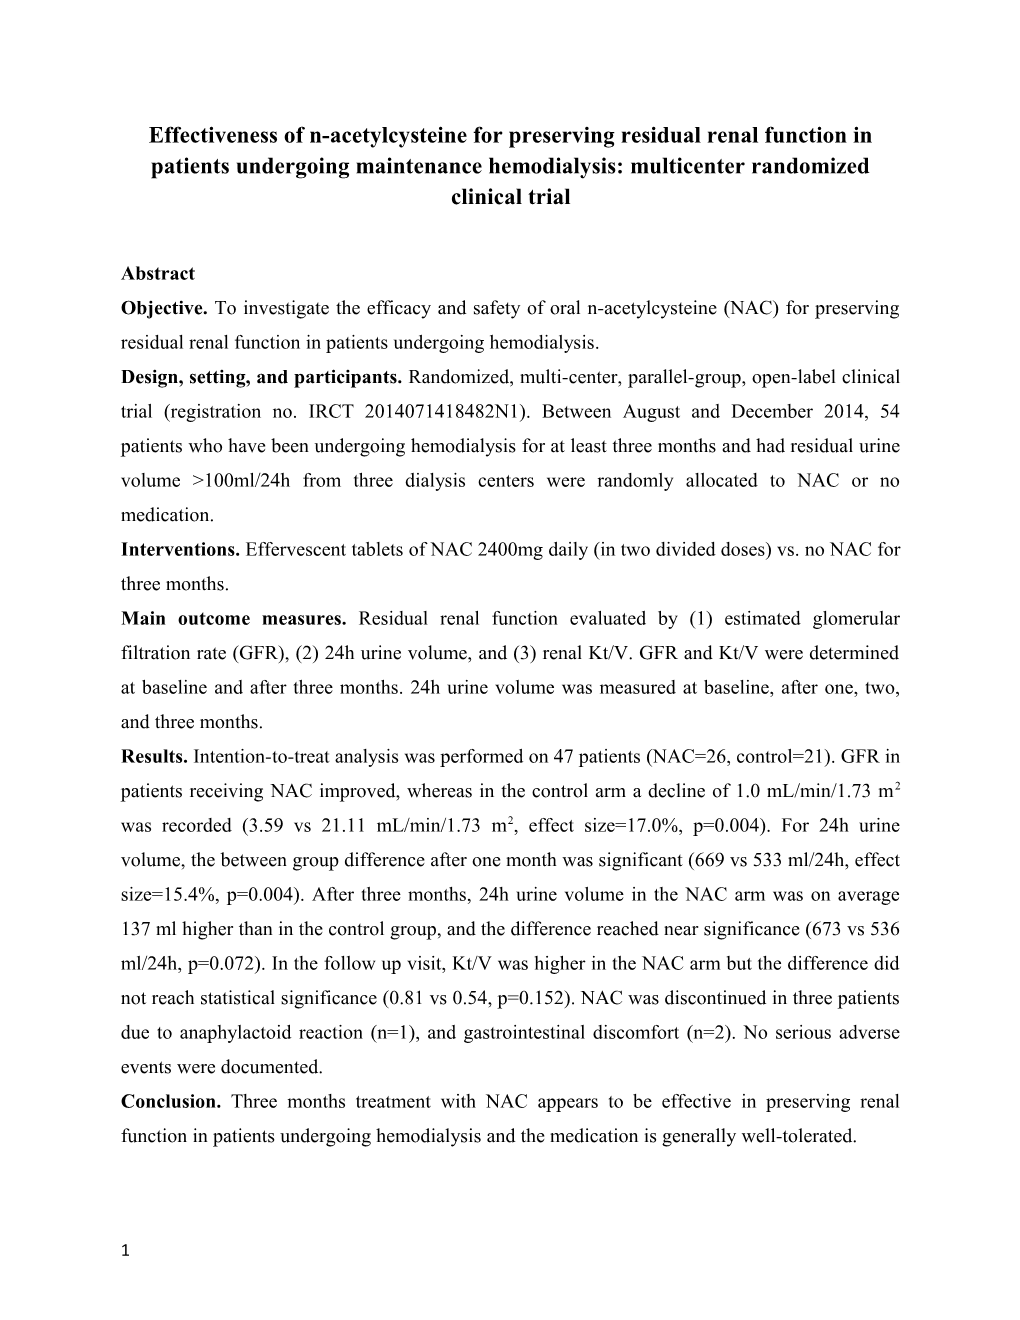 Effectiveness of N-Acetylcysteine for Preserving Residual Renal Function in Patients Undergoing